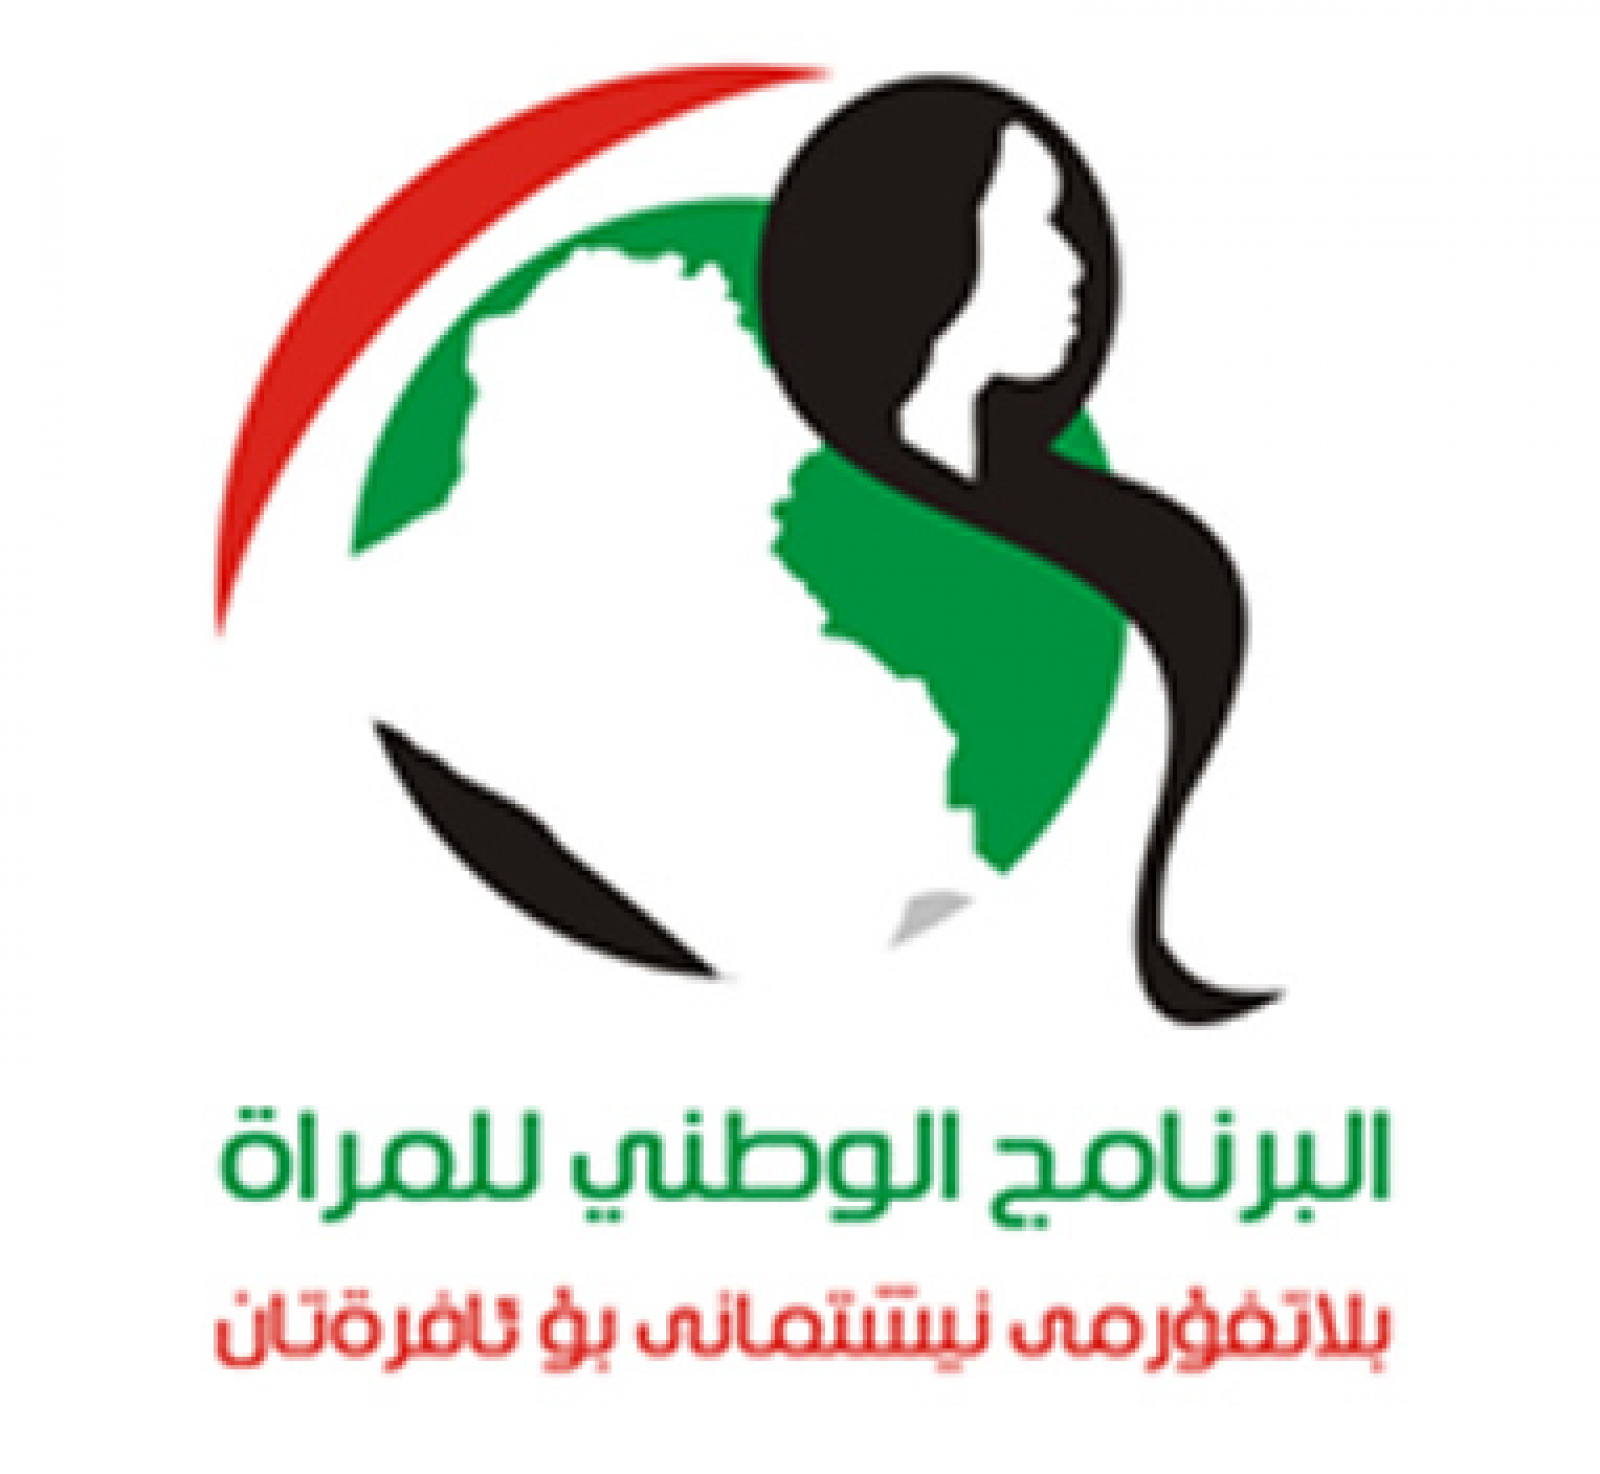 National Platform for Women Launched in Lead Up to Iraqi Elections